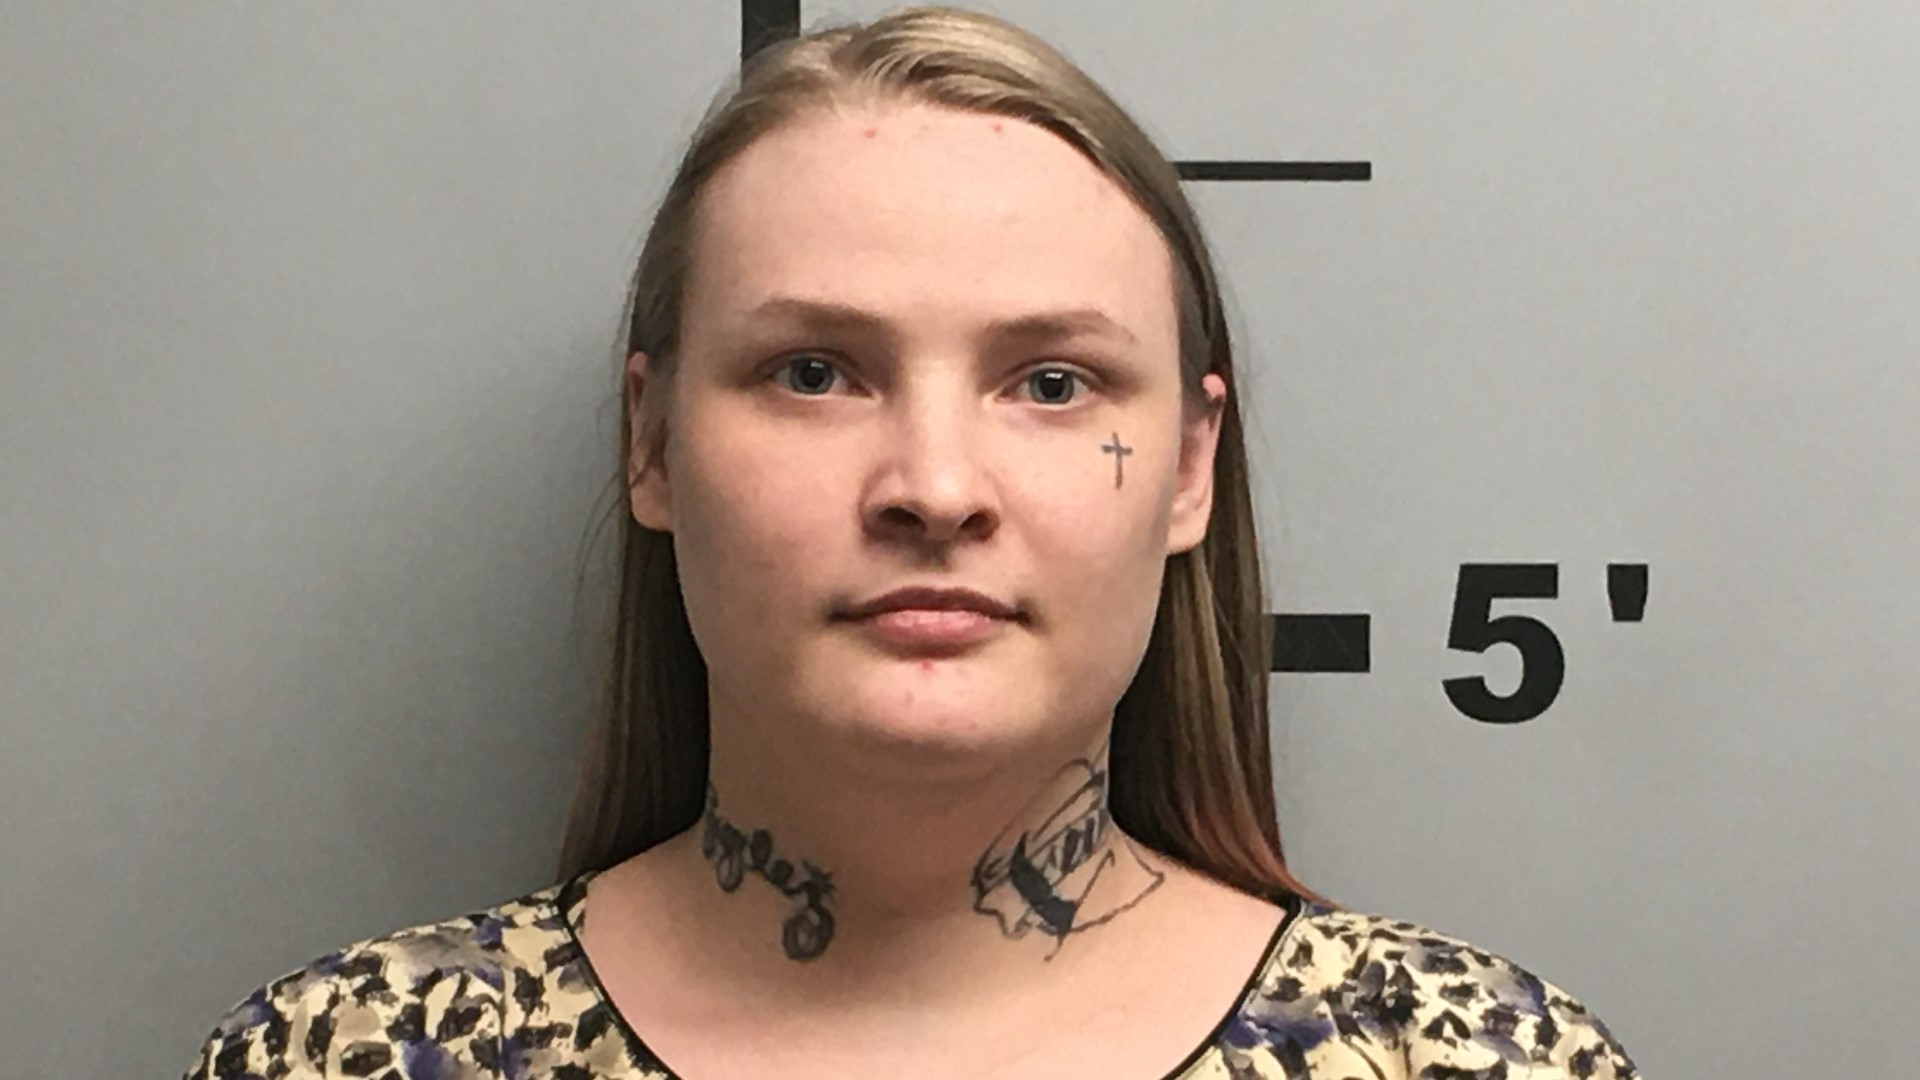 Shawna Cash is charged with capital murder in the death of Officer Kevin Apple in Benton County Arkansas.